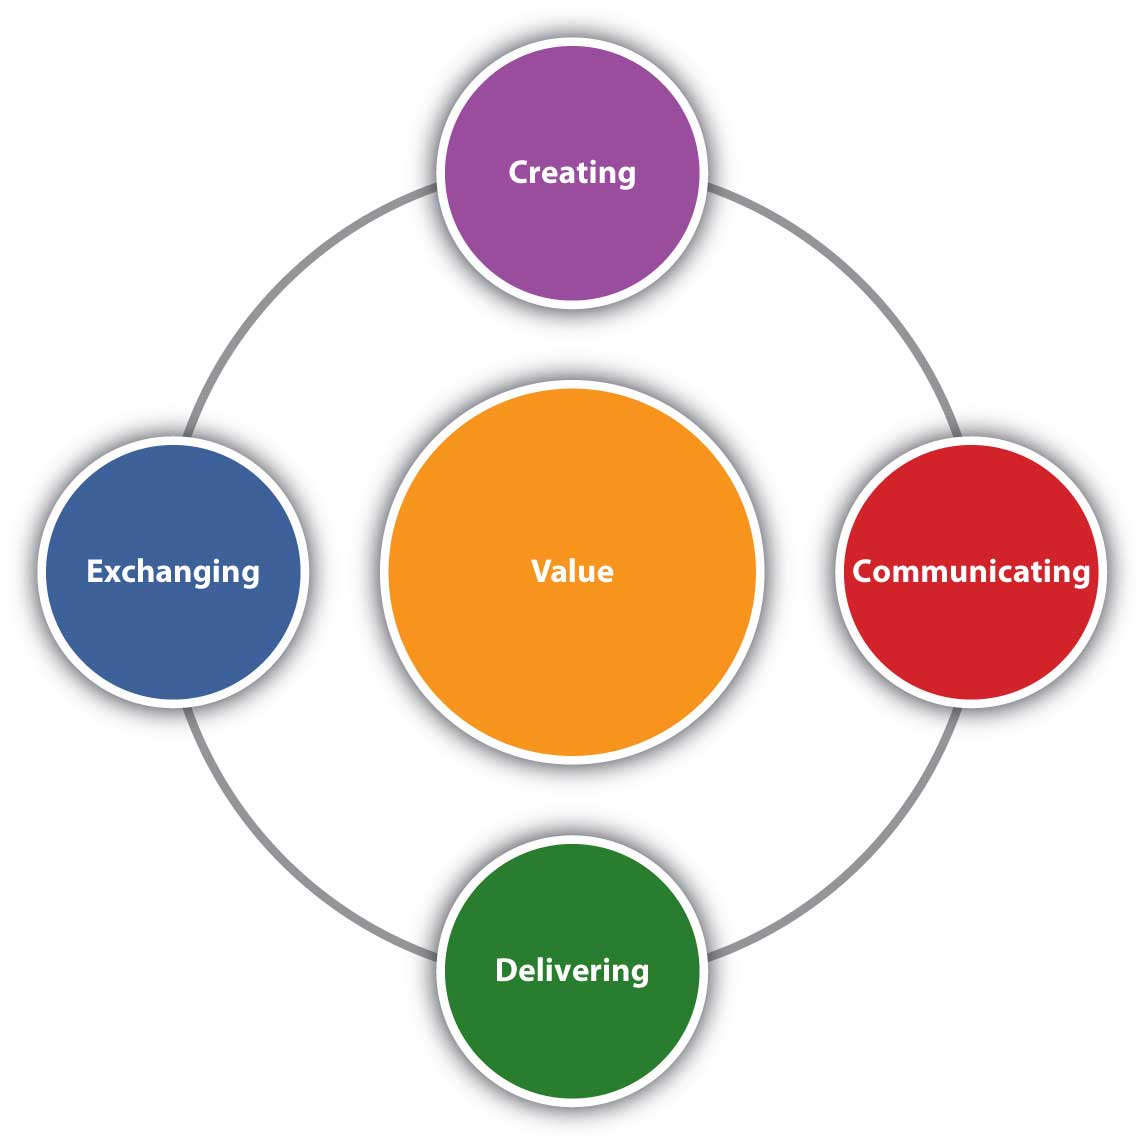 Marketing is composed of four activities centered on customer value: creating, communicating, delivering, and exchanging value